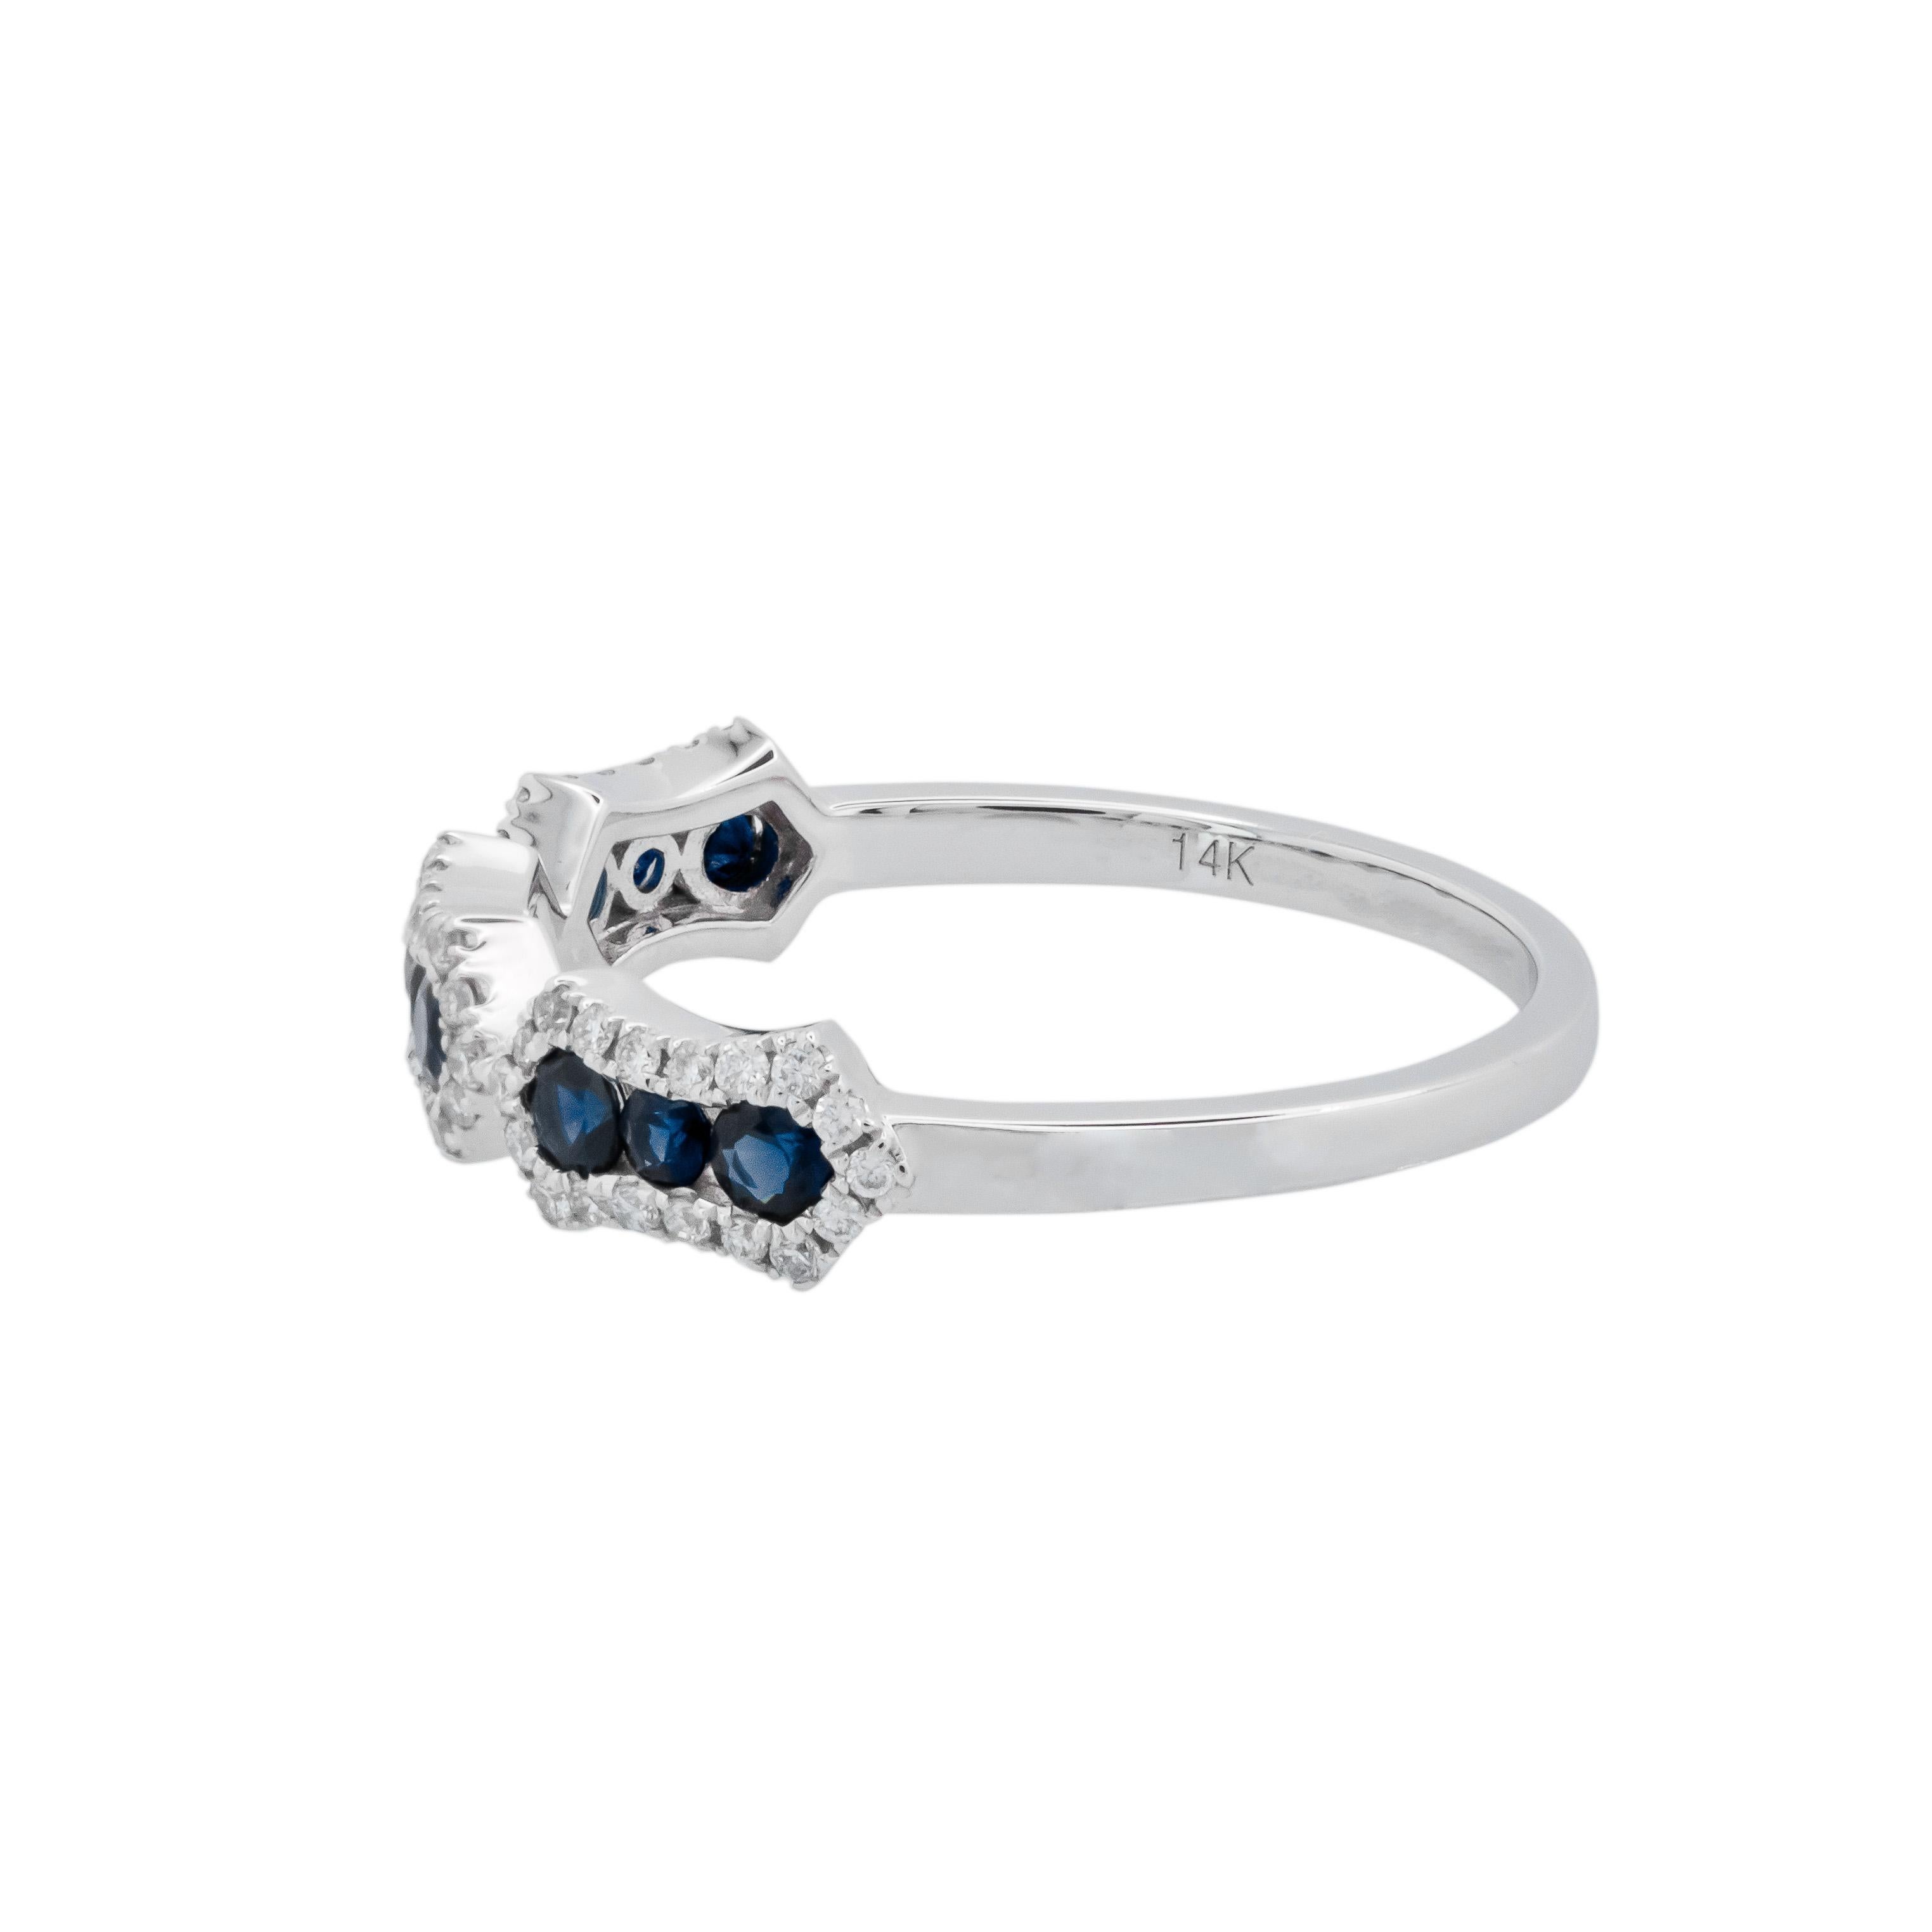 Crafted with precision and care, this ring boasts a dazzling 9 round sapphires that are encircled by a halo of 54 round brilliant cut sparkling diamonds, set in lustrous 14k white gold. The sapphires are in three groups of three with each group